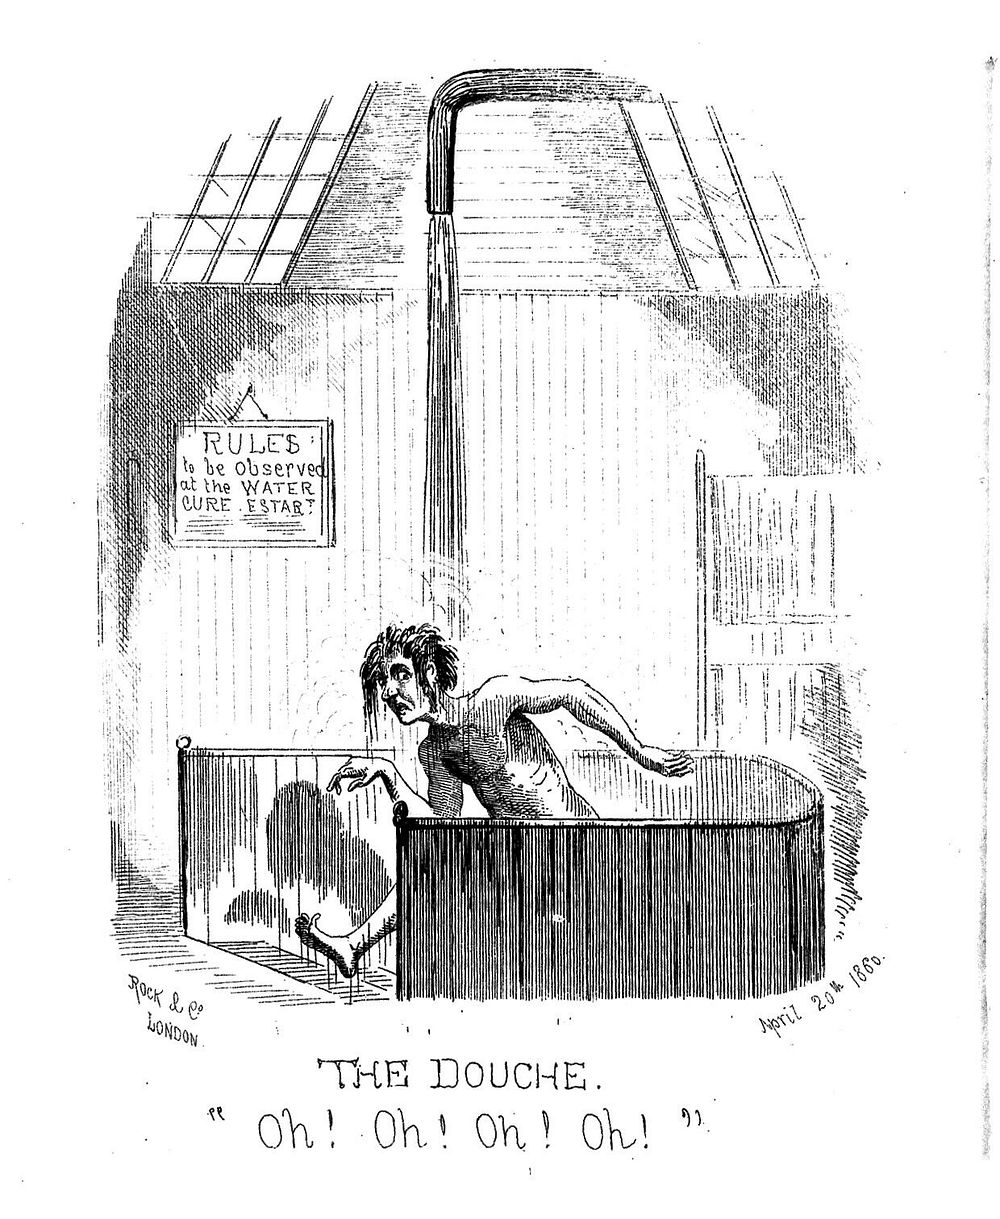 A man taking a shower as part of a hydrotherapeutic cure. Wood engraving by O.T., 1860.